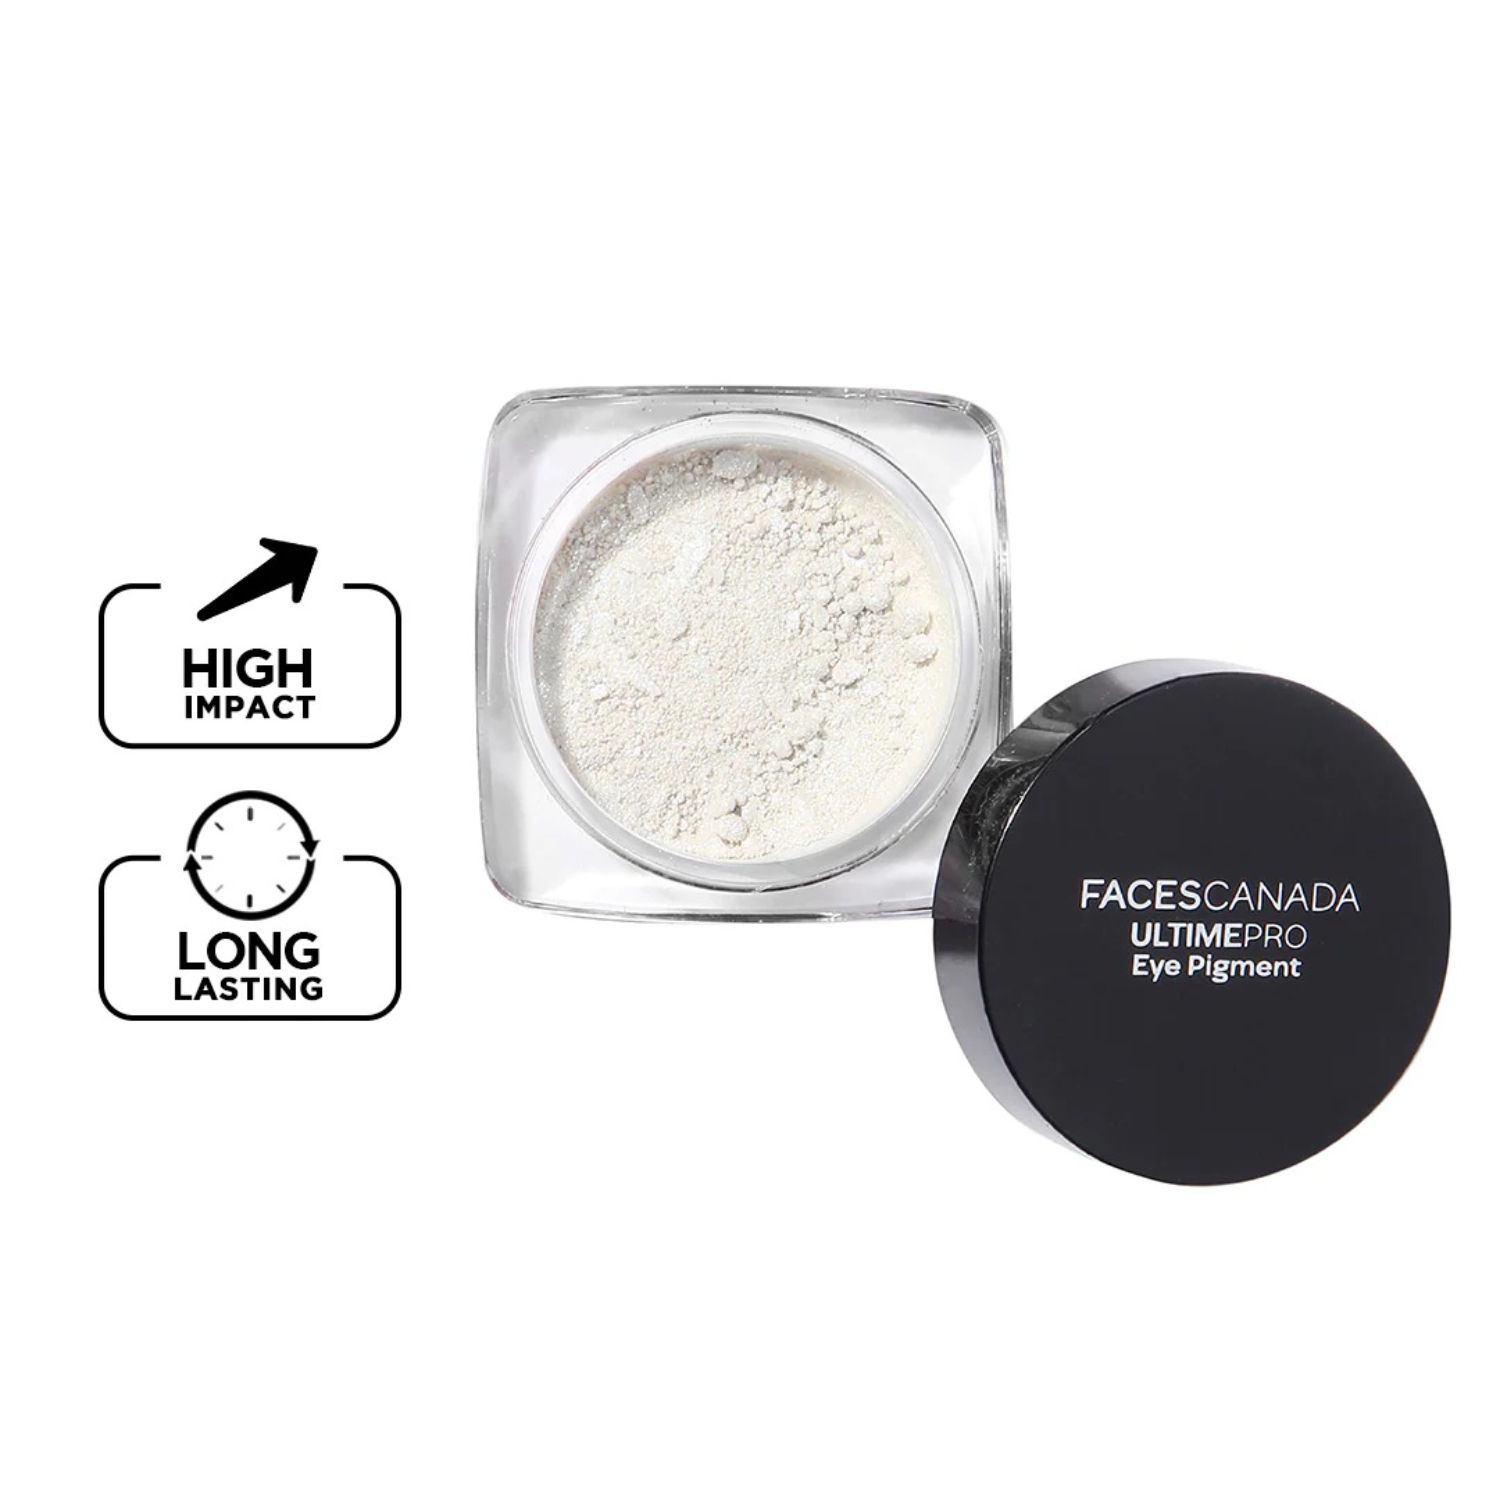 Buy FACES CANADA Ultime Pro Eye Pigment - Silver 01, 1.8g | Shimmery Finish | Long-Lasting | Intense Pigment | Excellent Color Payoff | Smooth Application - Purplle